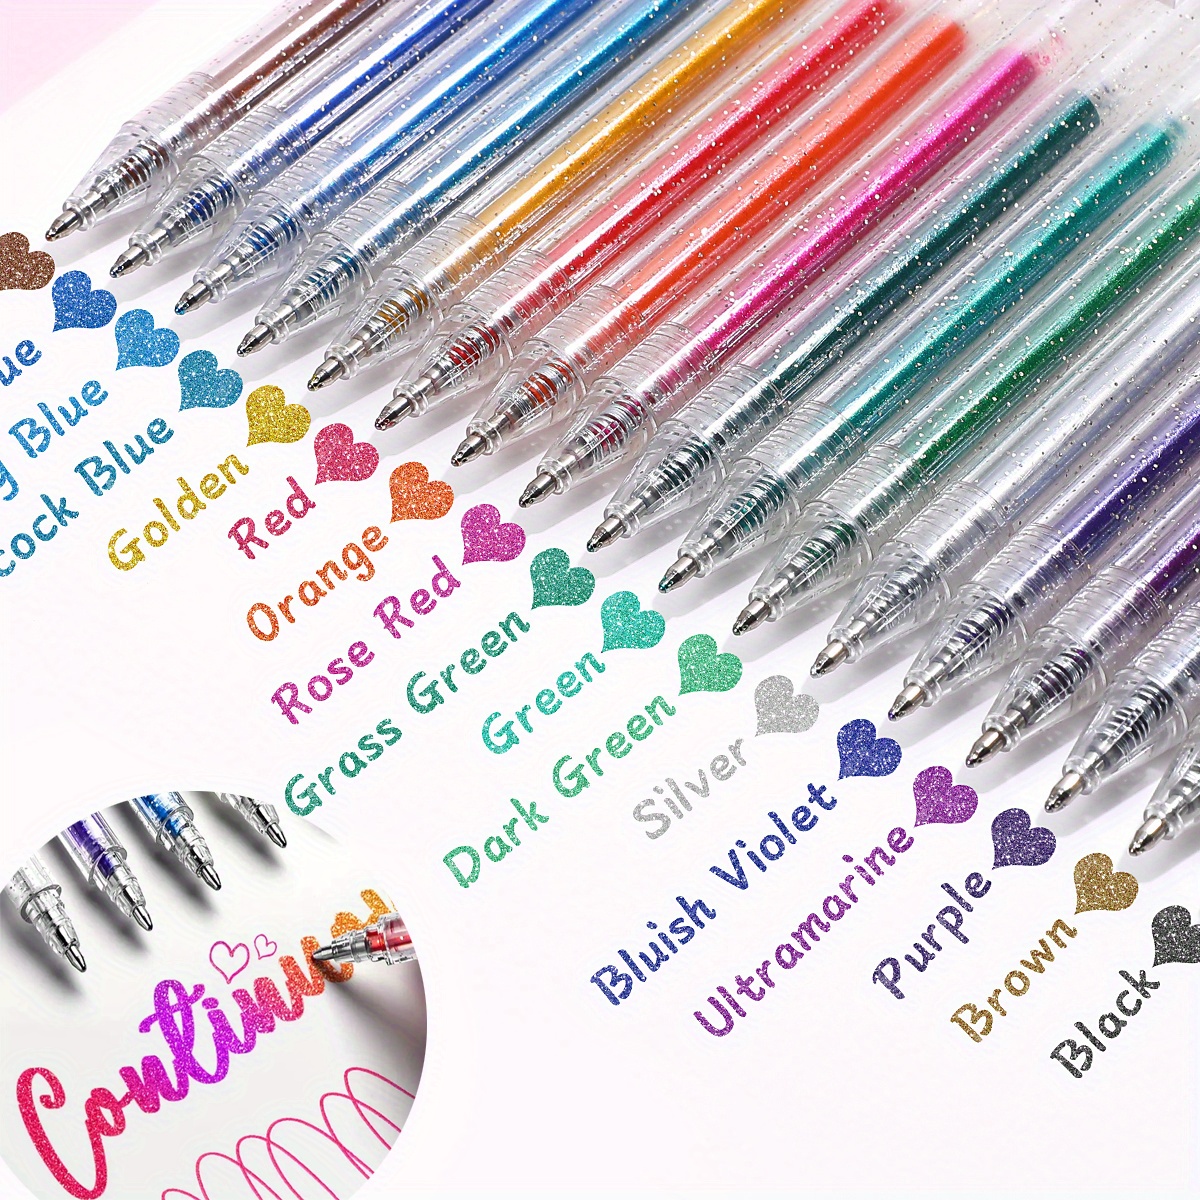 

18/12/8 Colors Neon Glitter Pens Finetip Art Markers 40% More Ink Colored Gel Pens For Coloring Book, Drawing, Doodling, Scrapbook, Journaling, Sparkle Penparty Holiday Mother's Day Gifts